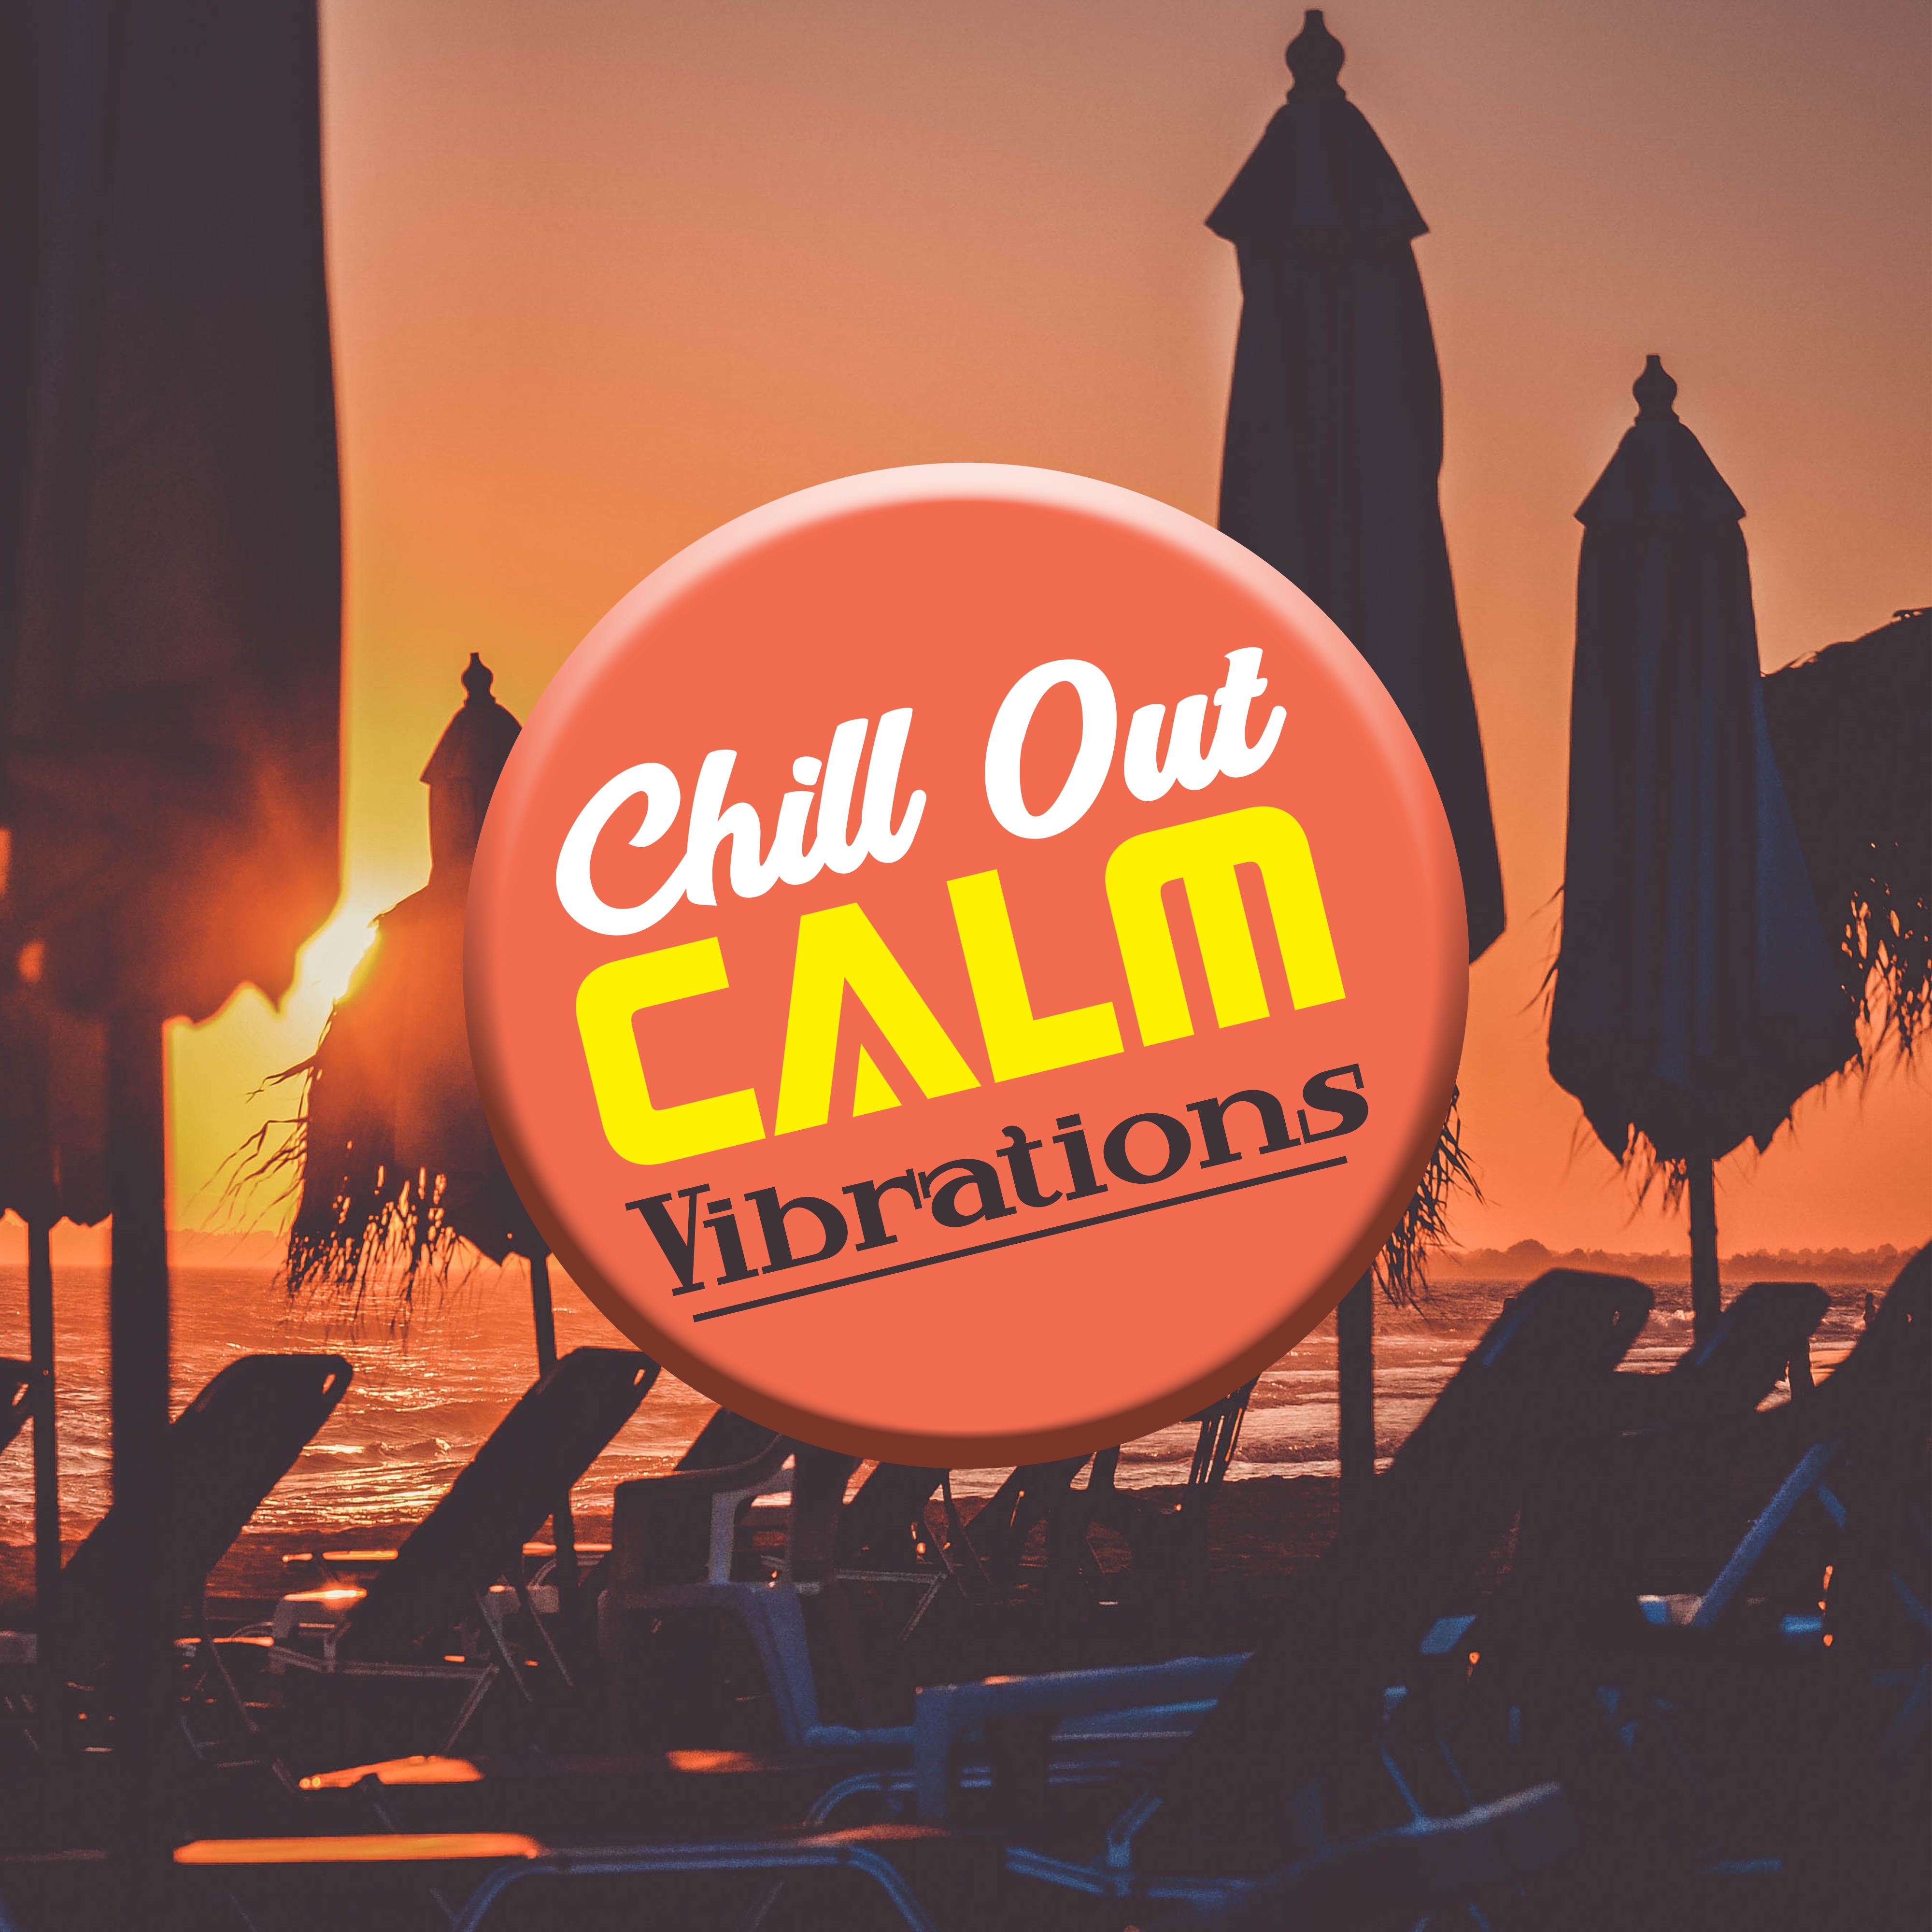 Chill Out Calm Vibrations – Sensual Chill Out Dance, **** Chill Out Beats, Erotic Melodies, Party Night